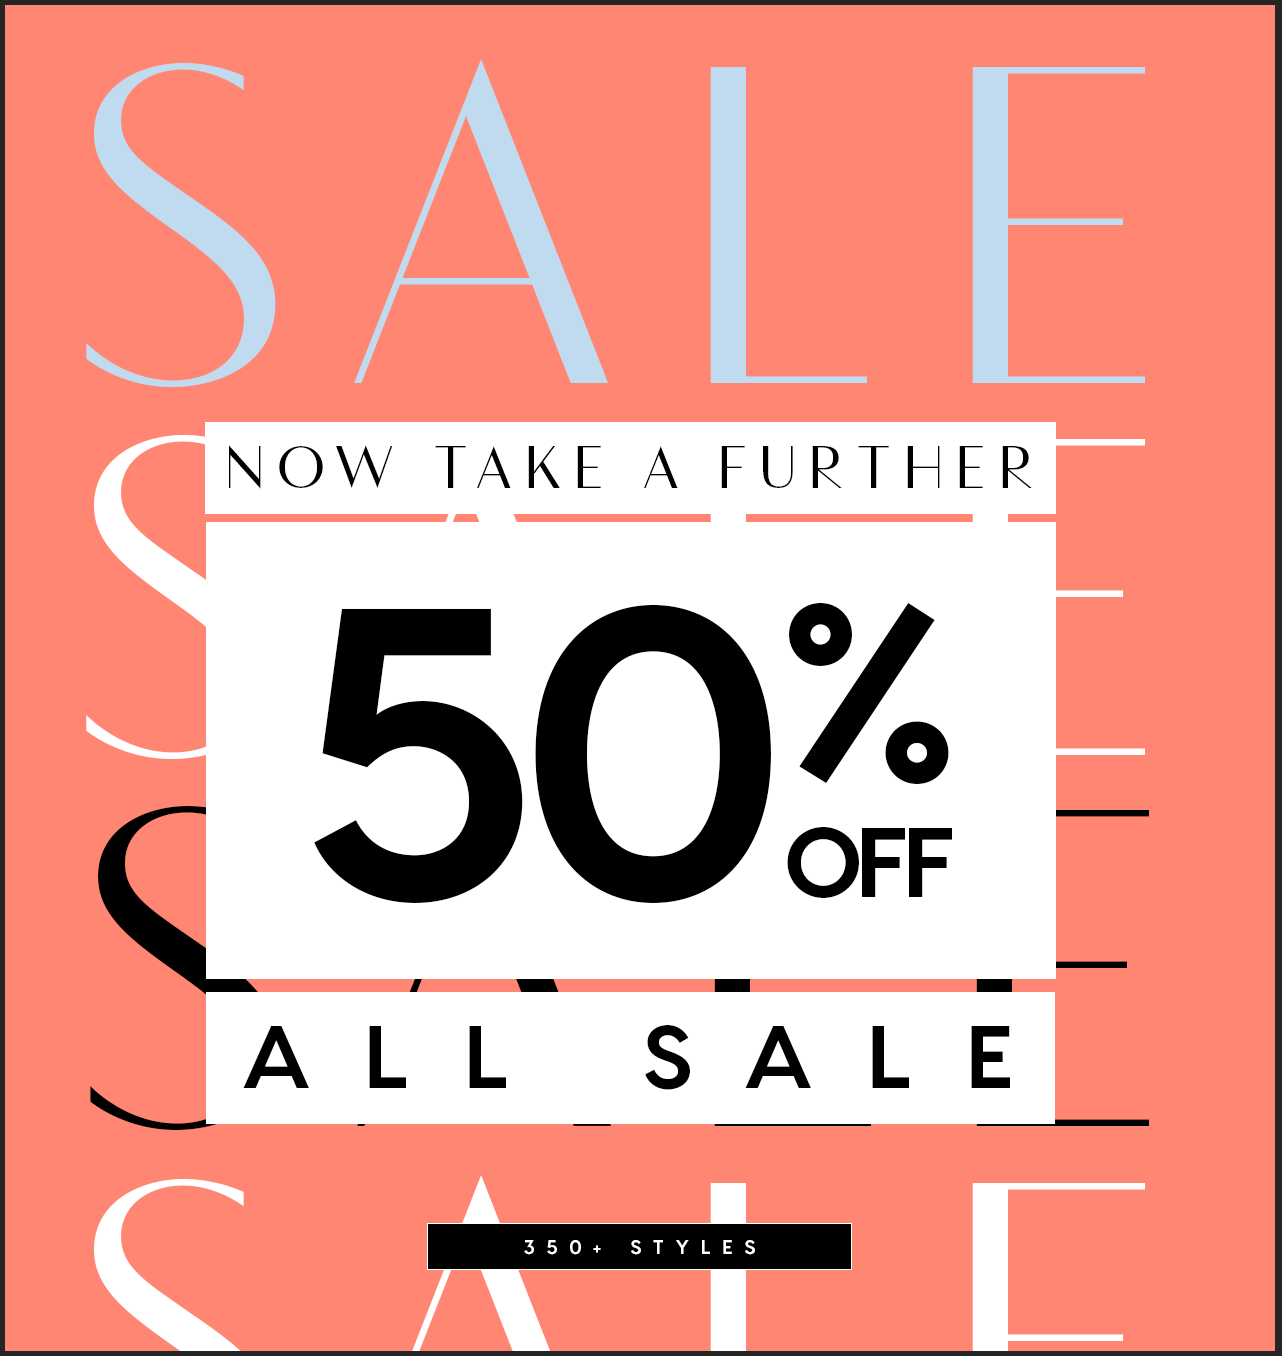 Take A Further 40% Off All Sale. 350+ Styles. Shop All Sale.